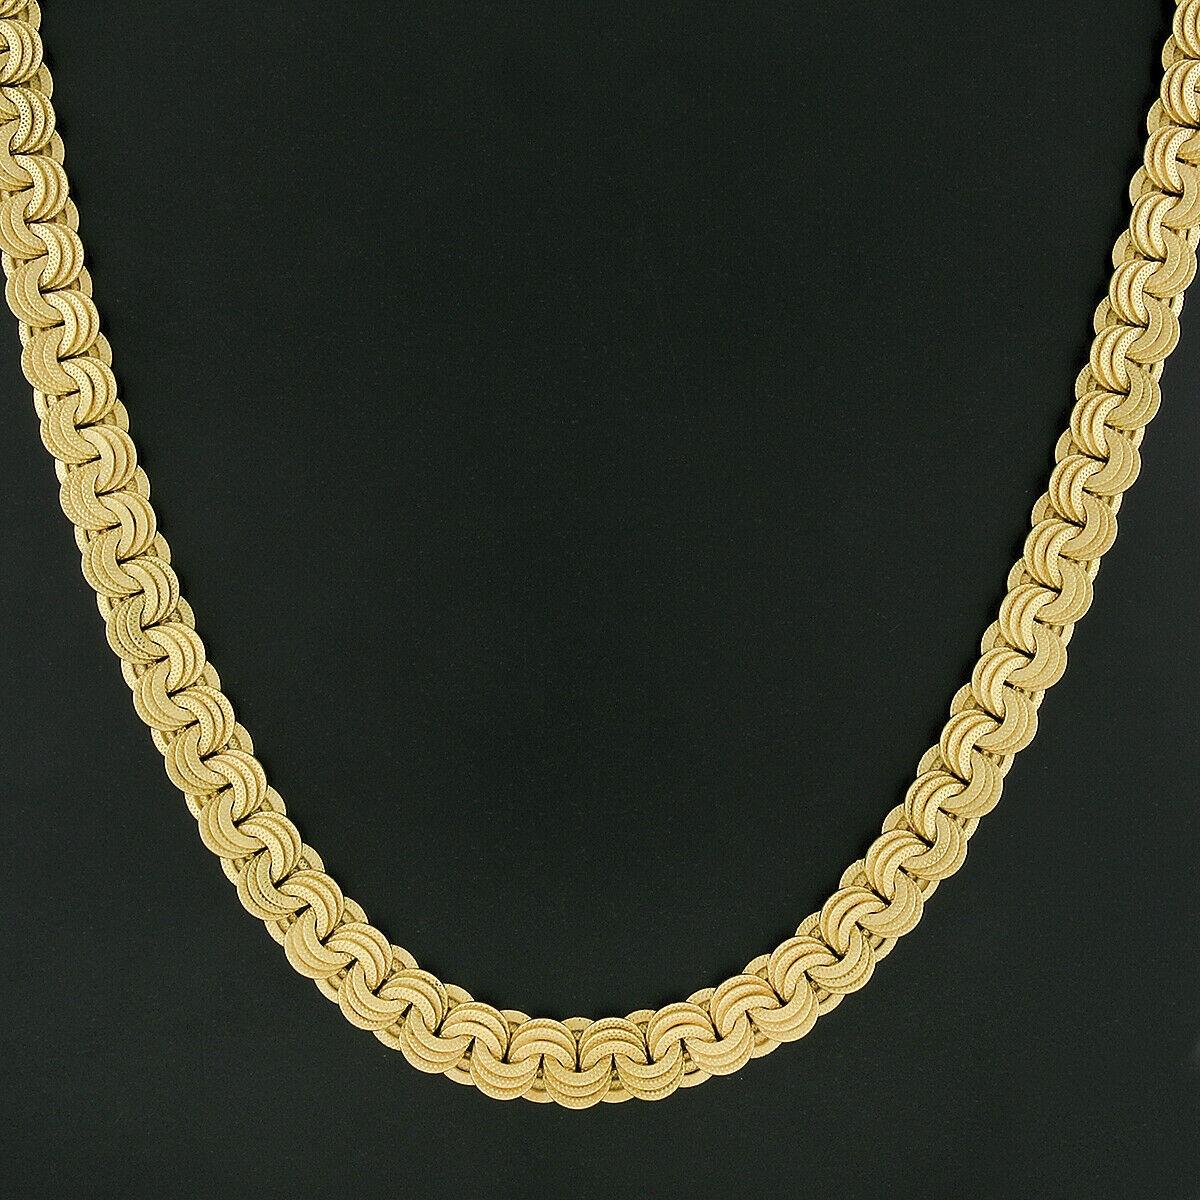 Here we have an absolutely magnificent statement necklace that was crafted in Italy from solid 18k yellow gold. The chain was designed and crafted by Giovanni Marchisio and it features very fine and well made, textured triple circular design links